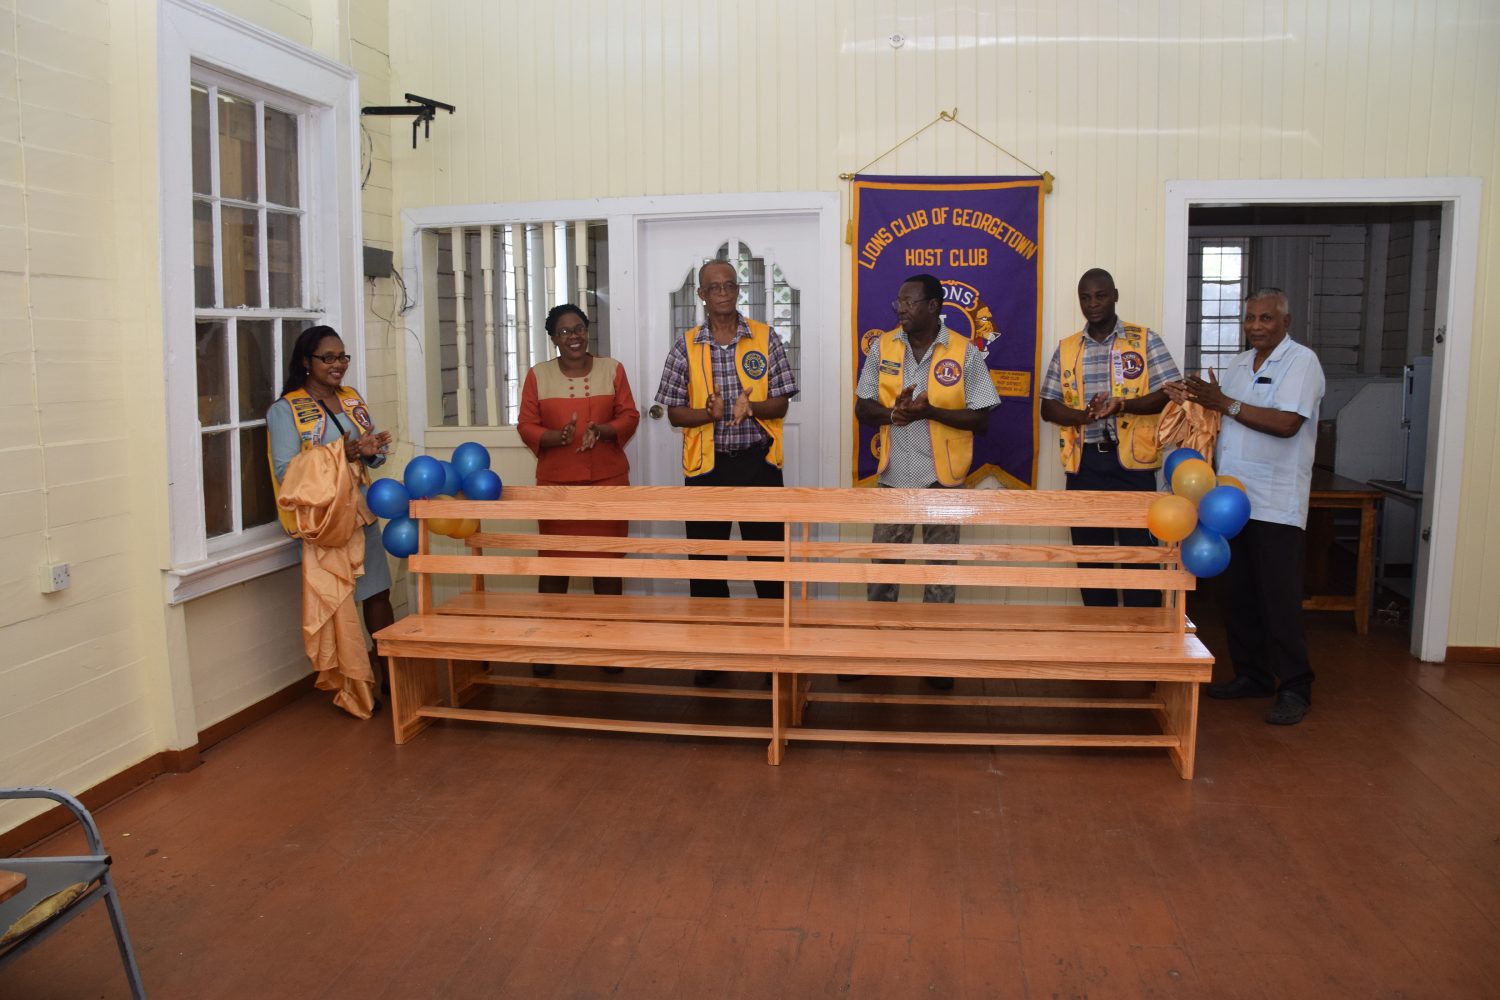 Georgetown Lions Clubs International President Lance Kennedy and his club members with Guyana Post Office Corporation Area Manager, Donette Semple along with a customer unveiling the benches.

